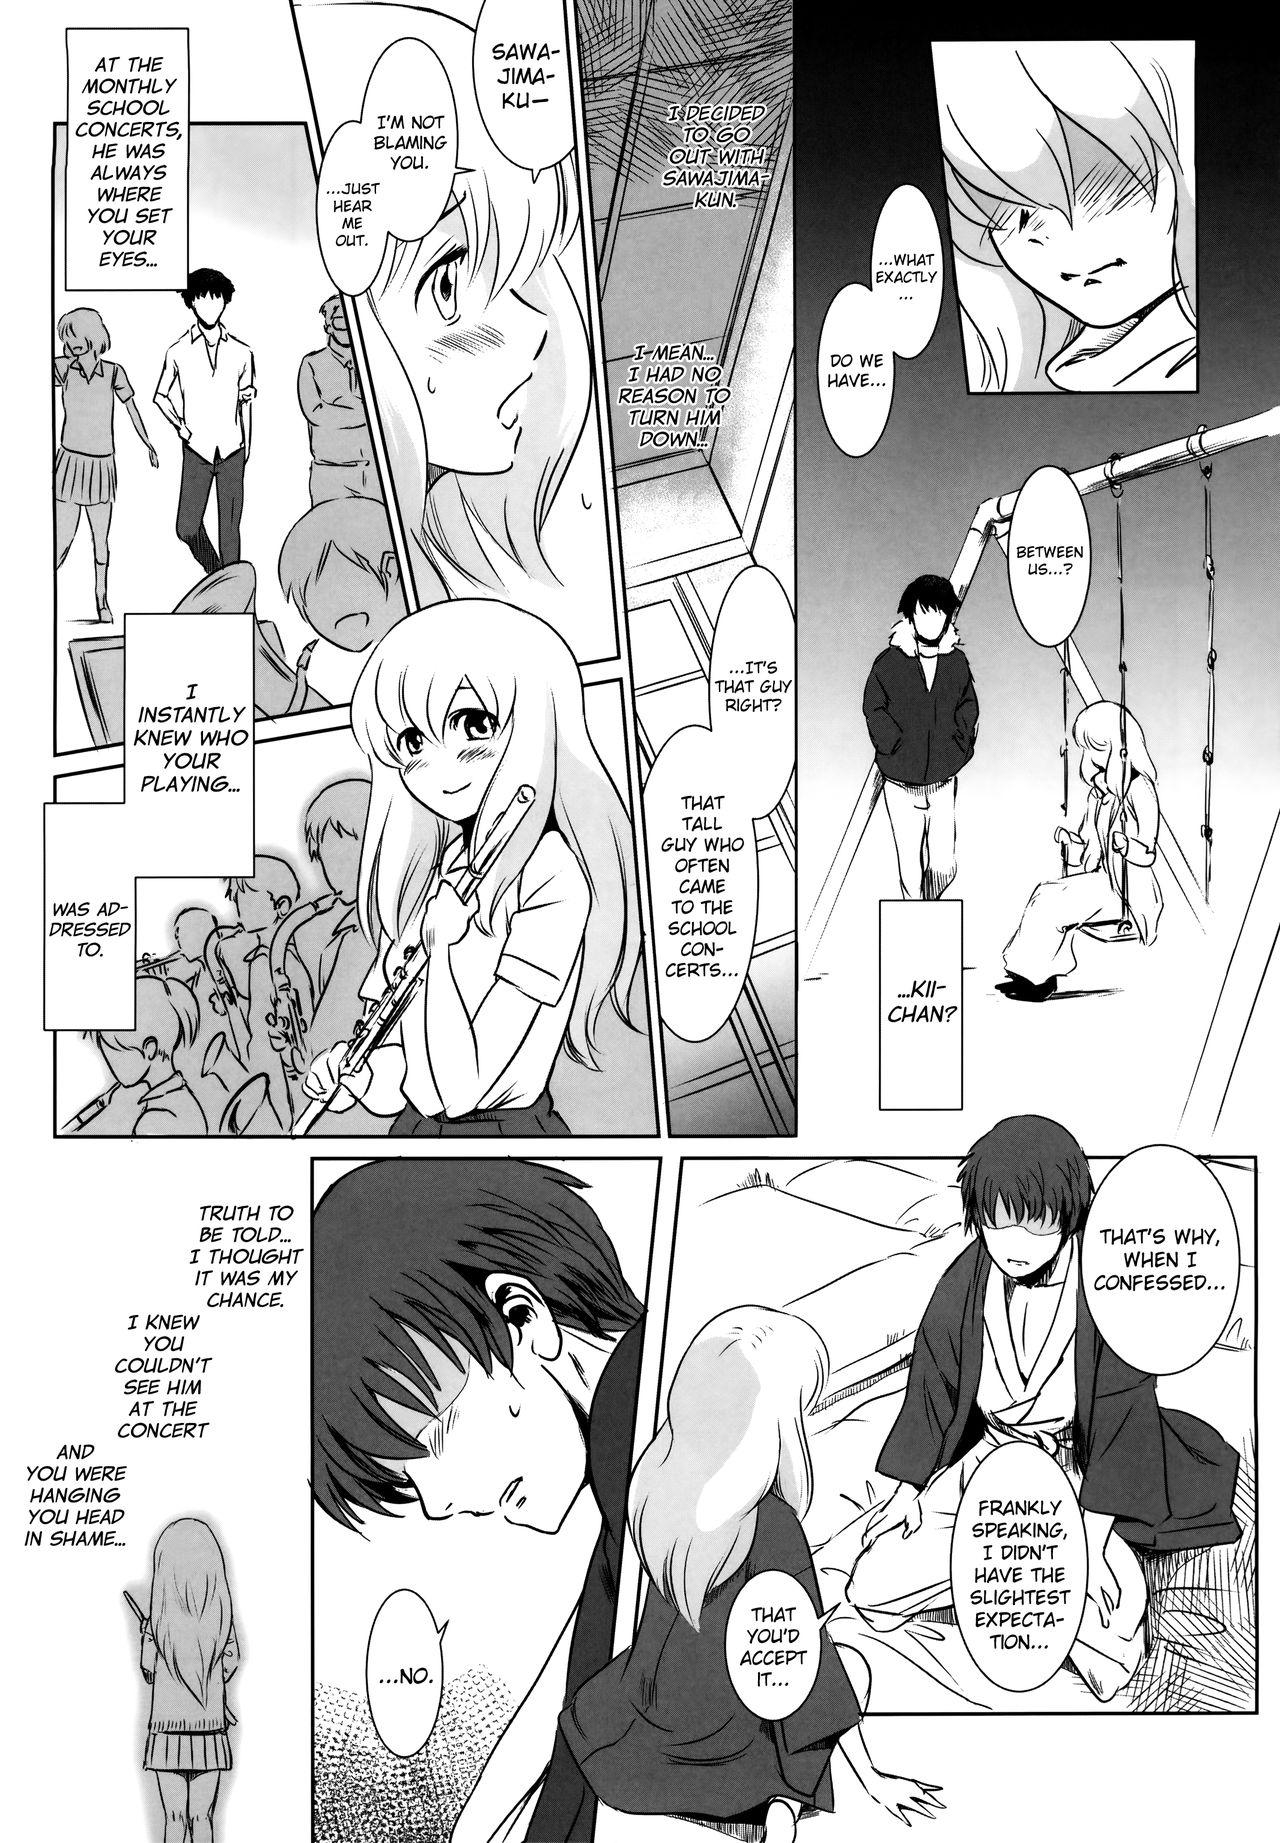 Adult Story of the 'N' Situation - Situation#2 Kokoro Utsuri Hot Naked Women - Page 11